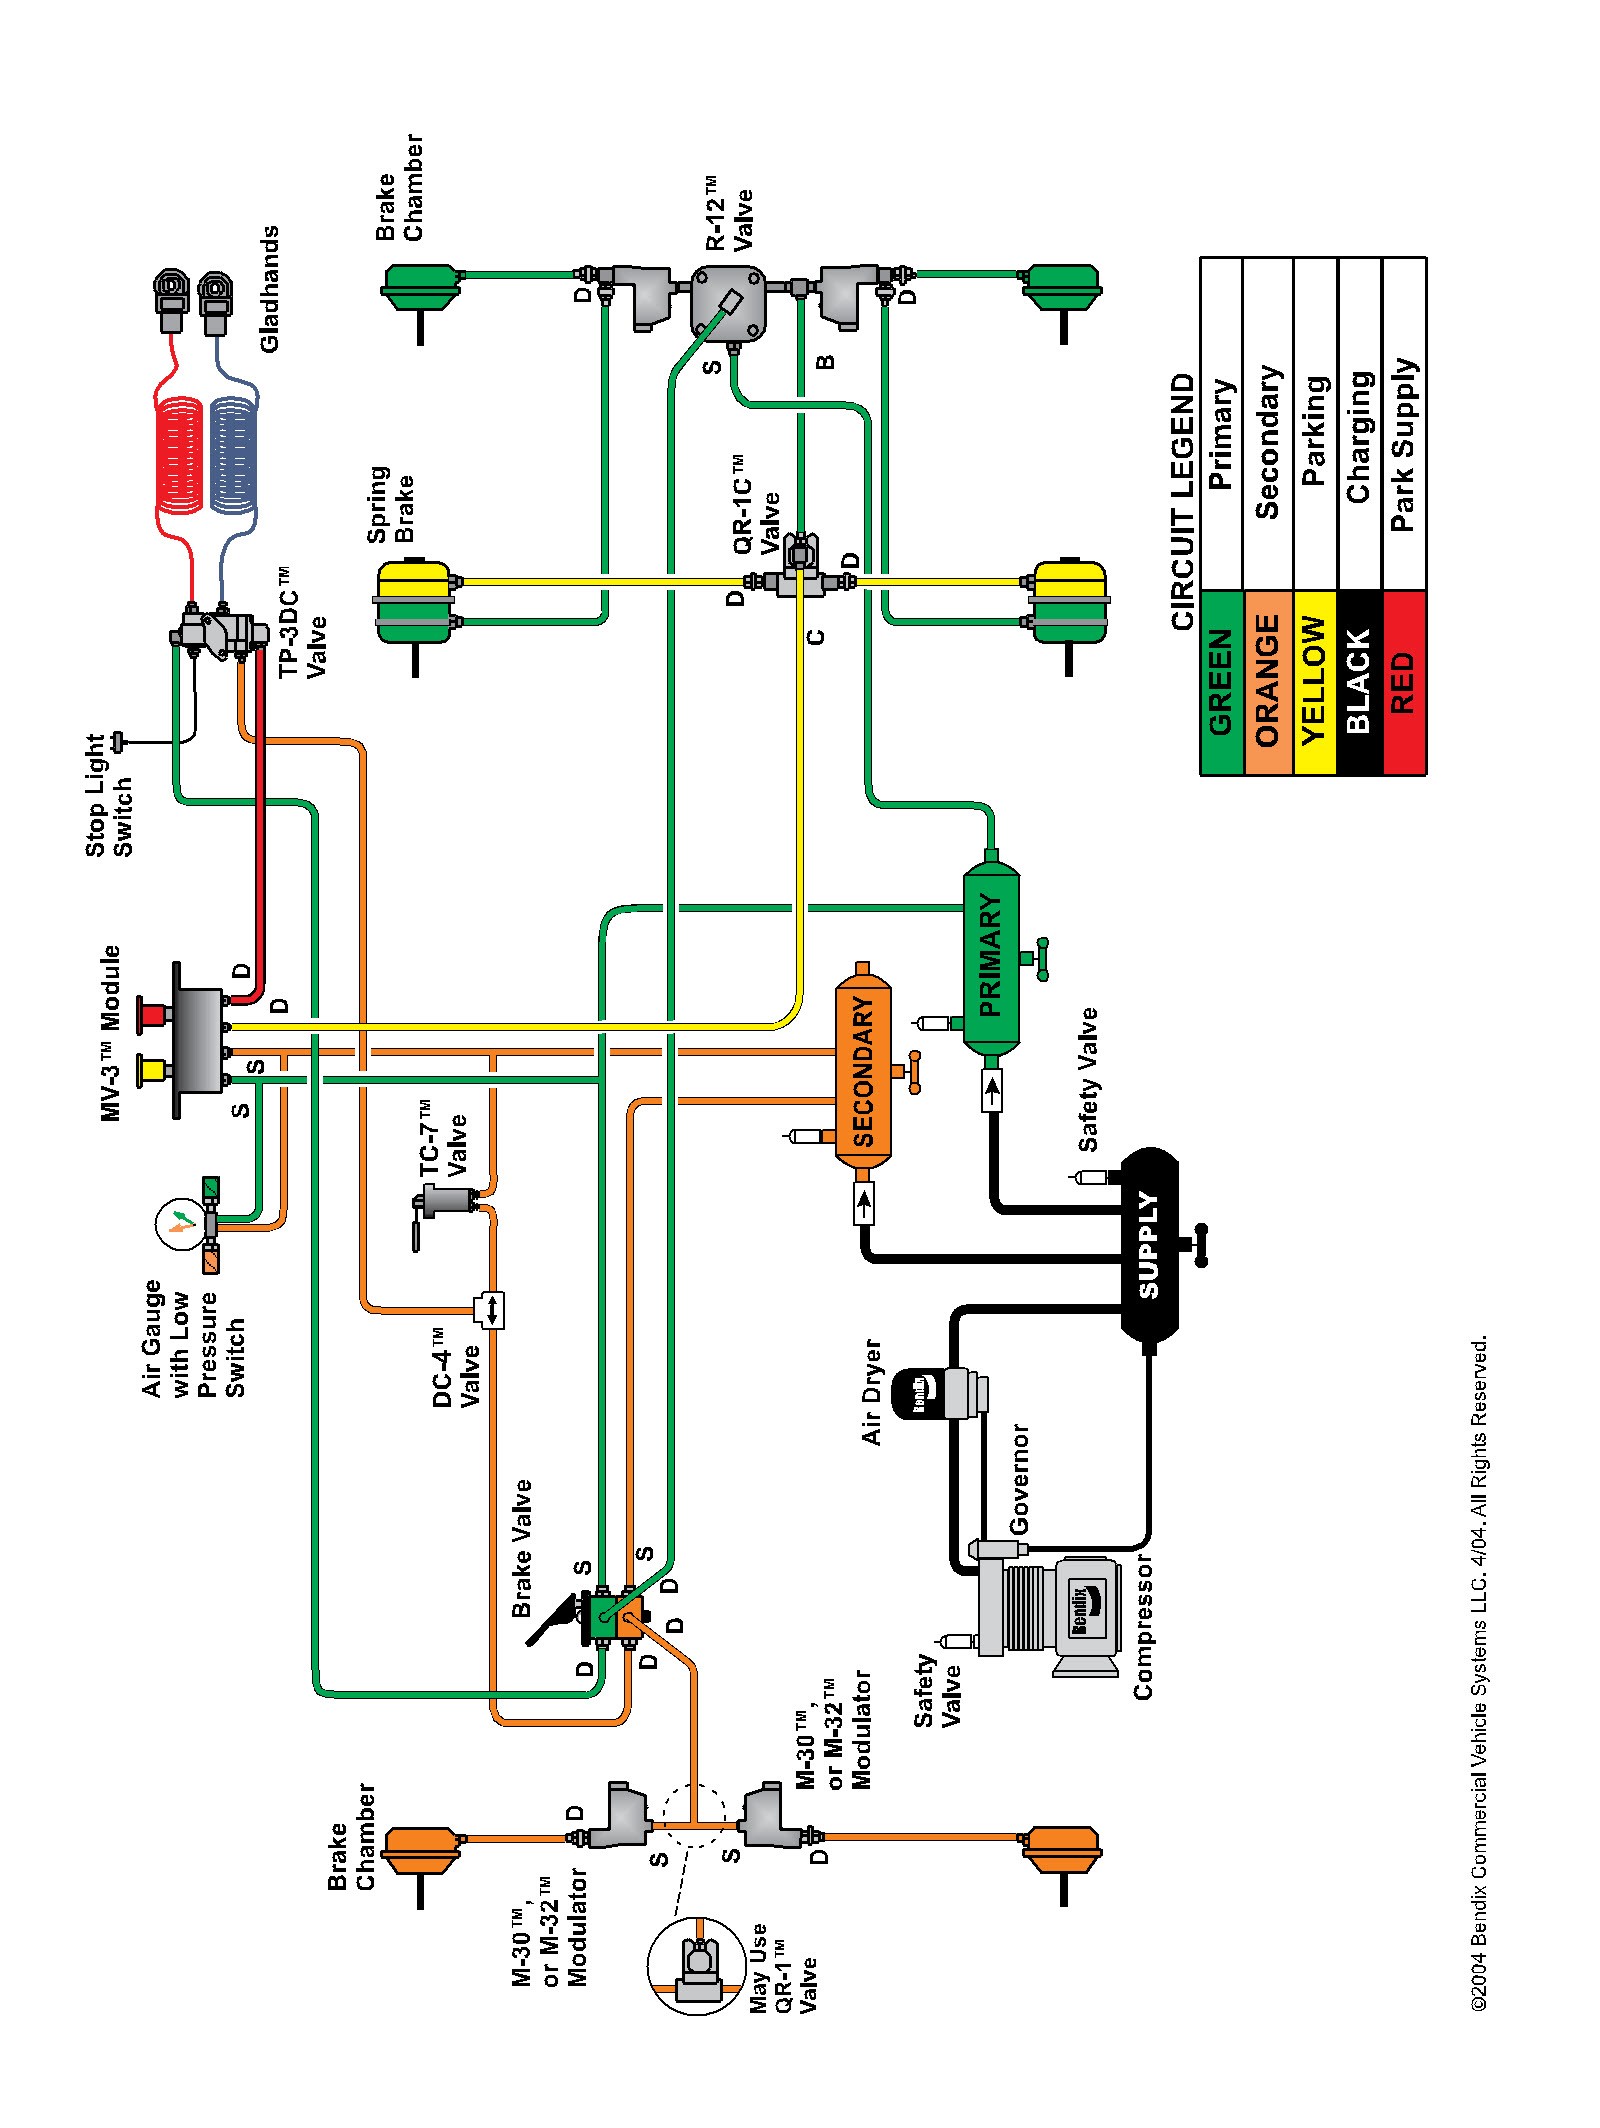 Abs System Diagram Management Unit Diagrams Besides Freightliner M2 Amu Wiring Of Abs System Diagram